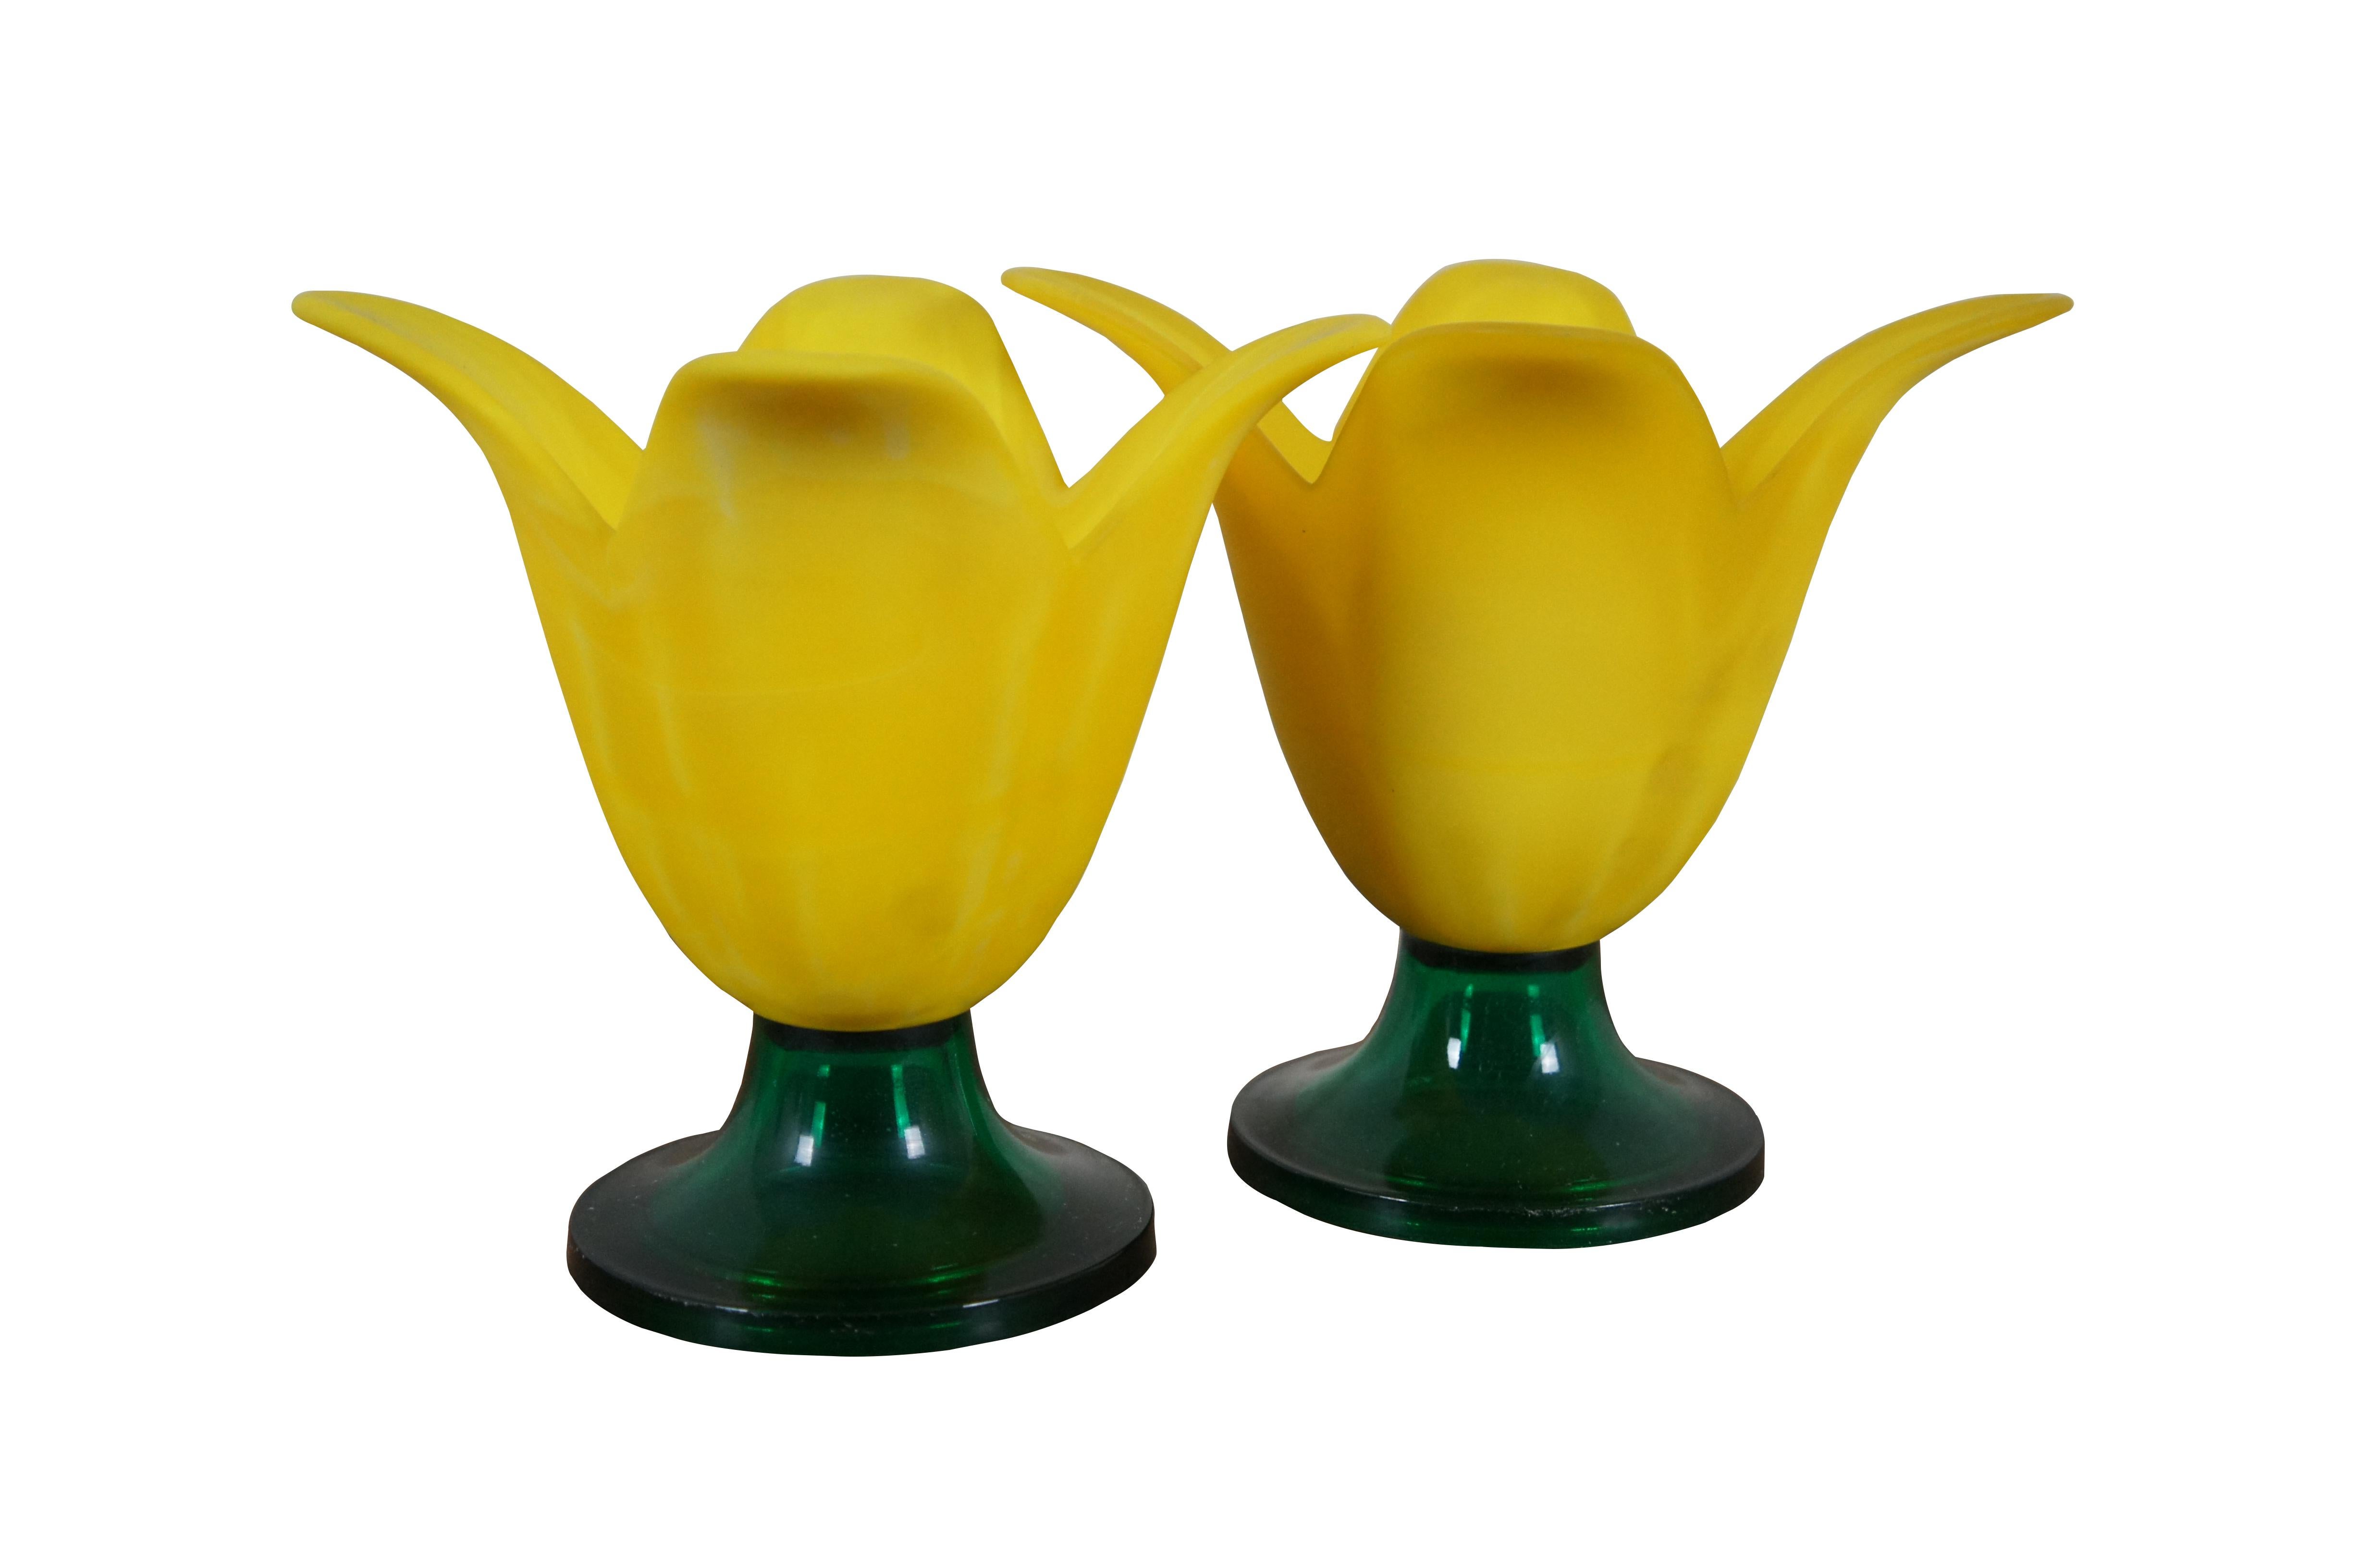 Pair of vintage Studio Nova votive / tea light tulip or daffodil shaped candle holders, featuring round green bases and frosted yellow petal shaped tops.

Dimensions:
7.75